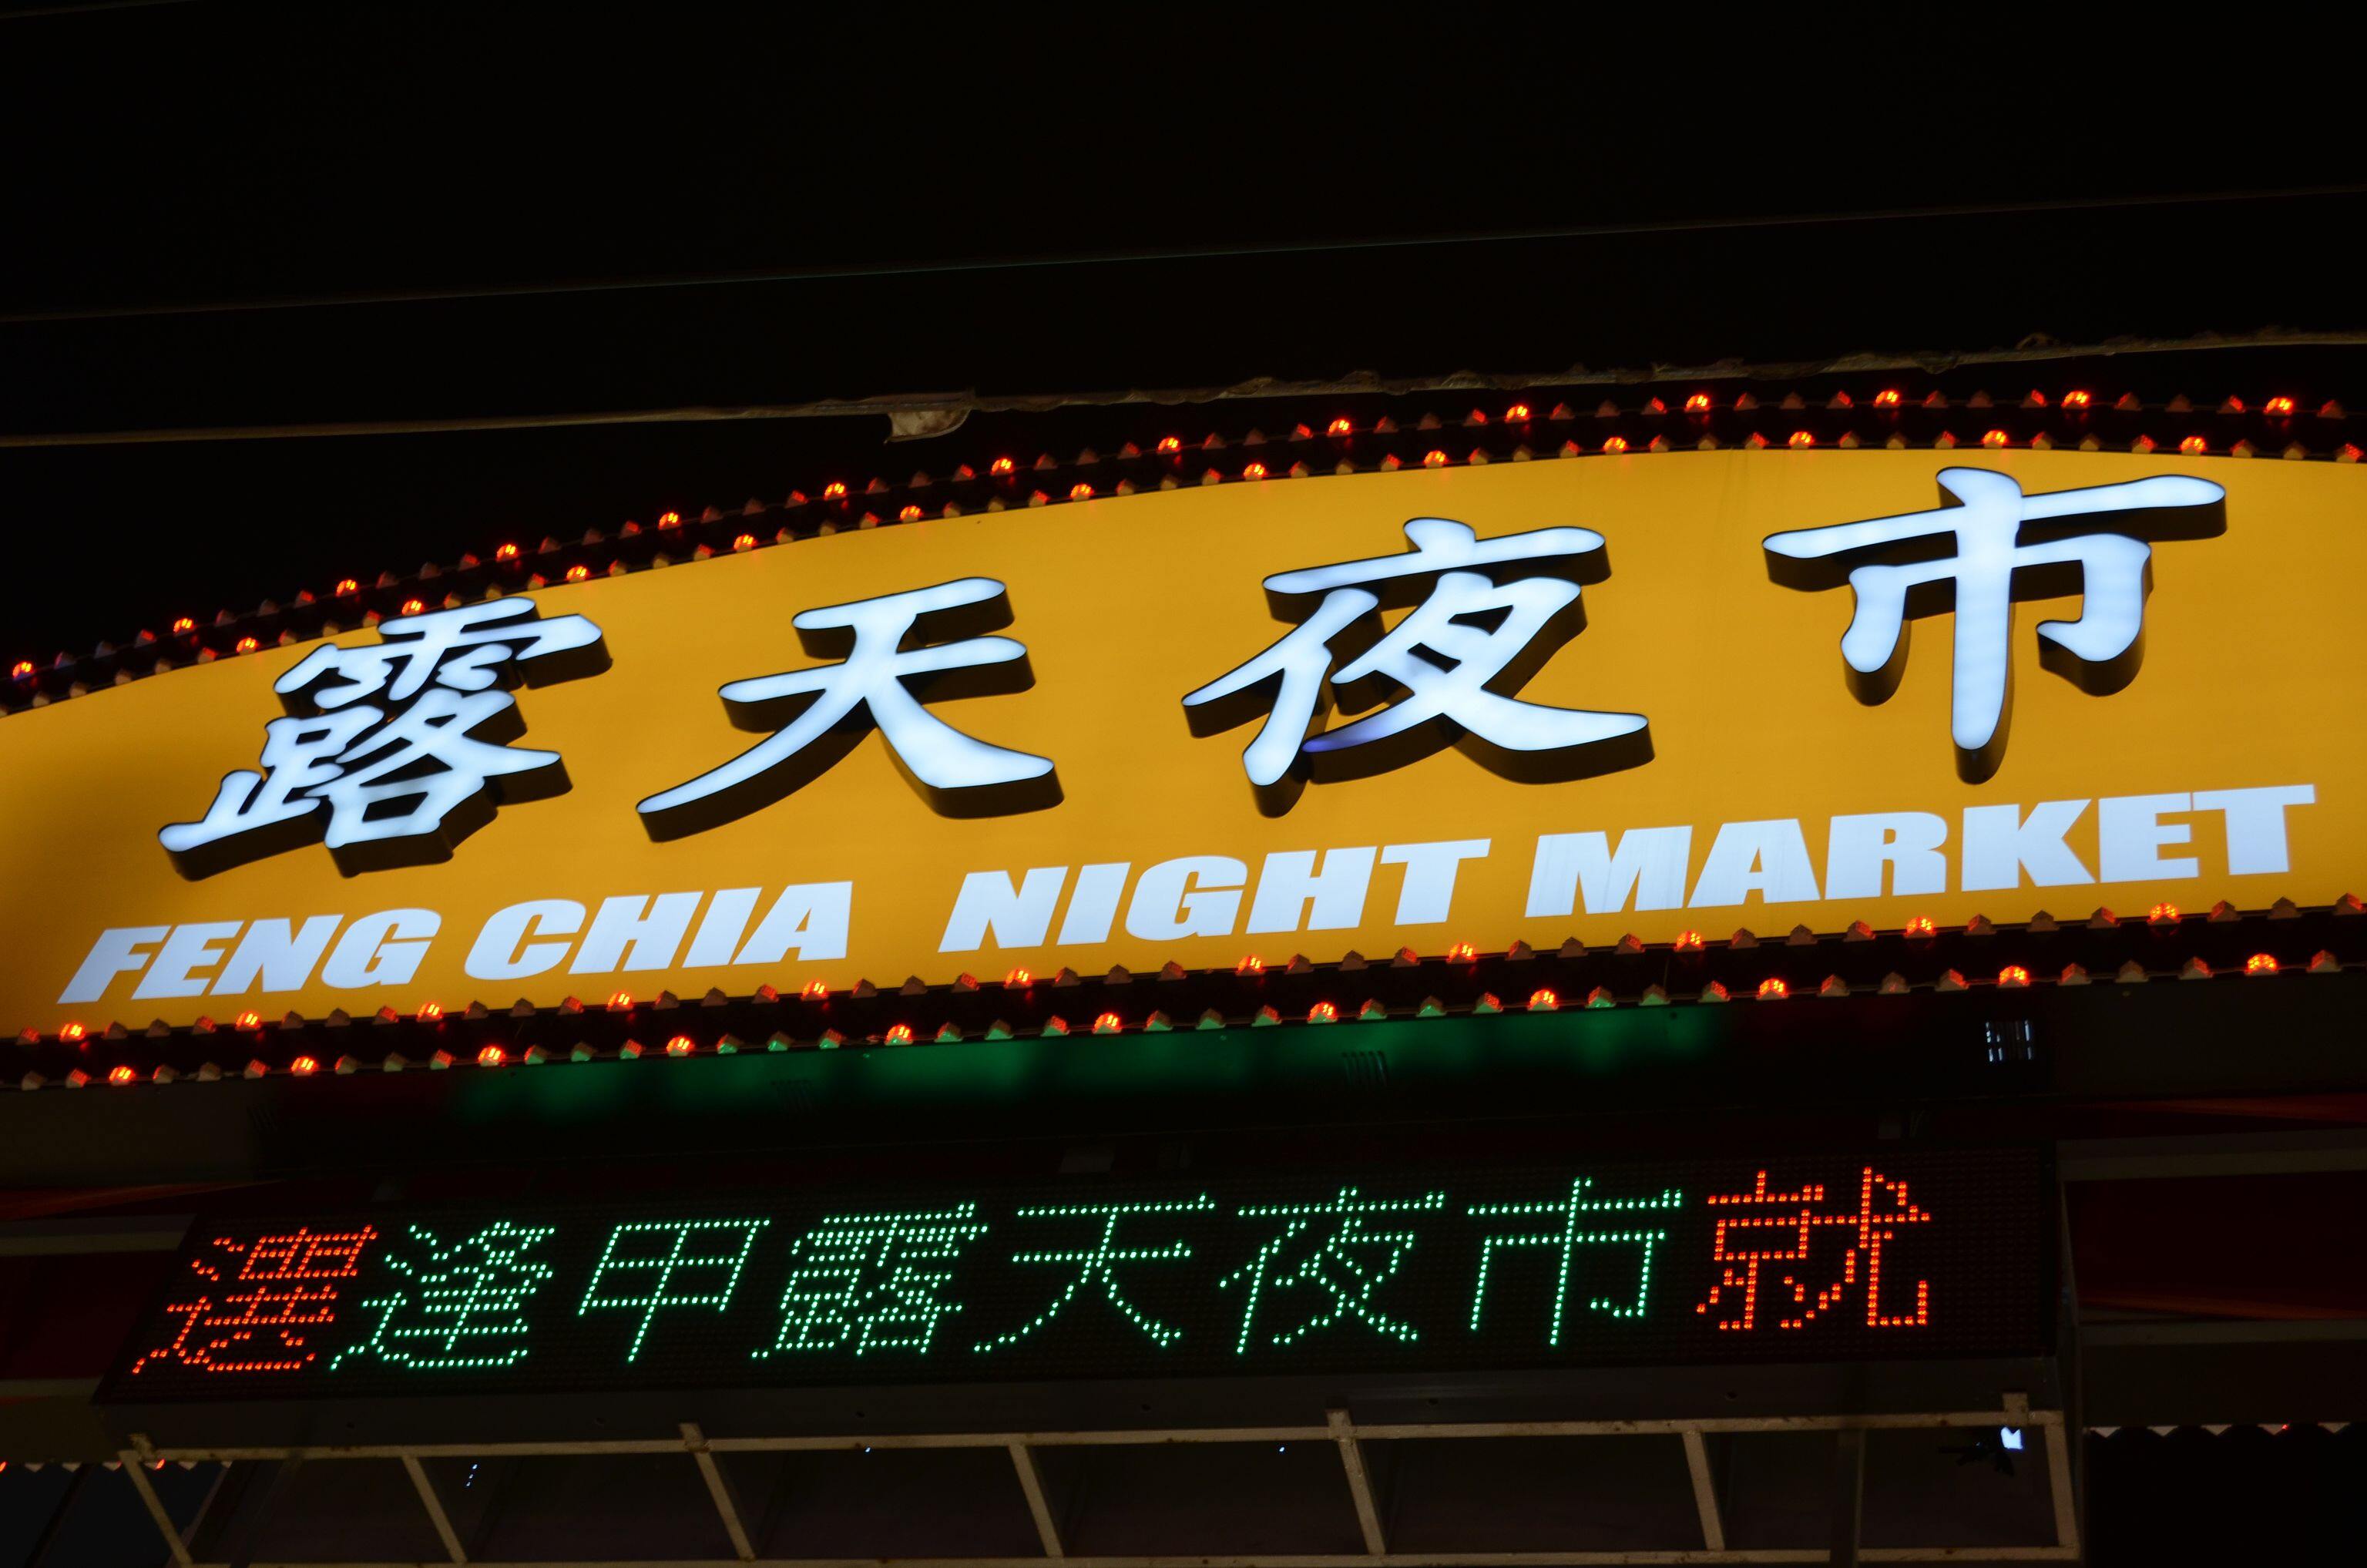 Photo of the entrance sign to the Feng Chia night market in Taichung, Taiwan taken in July 2012.